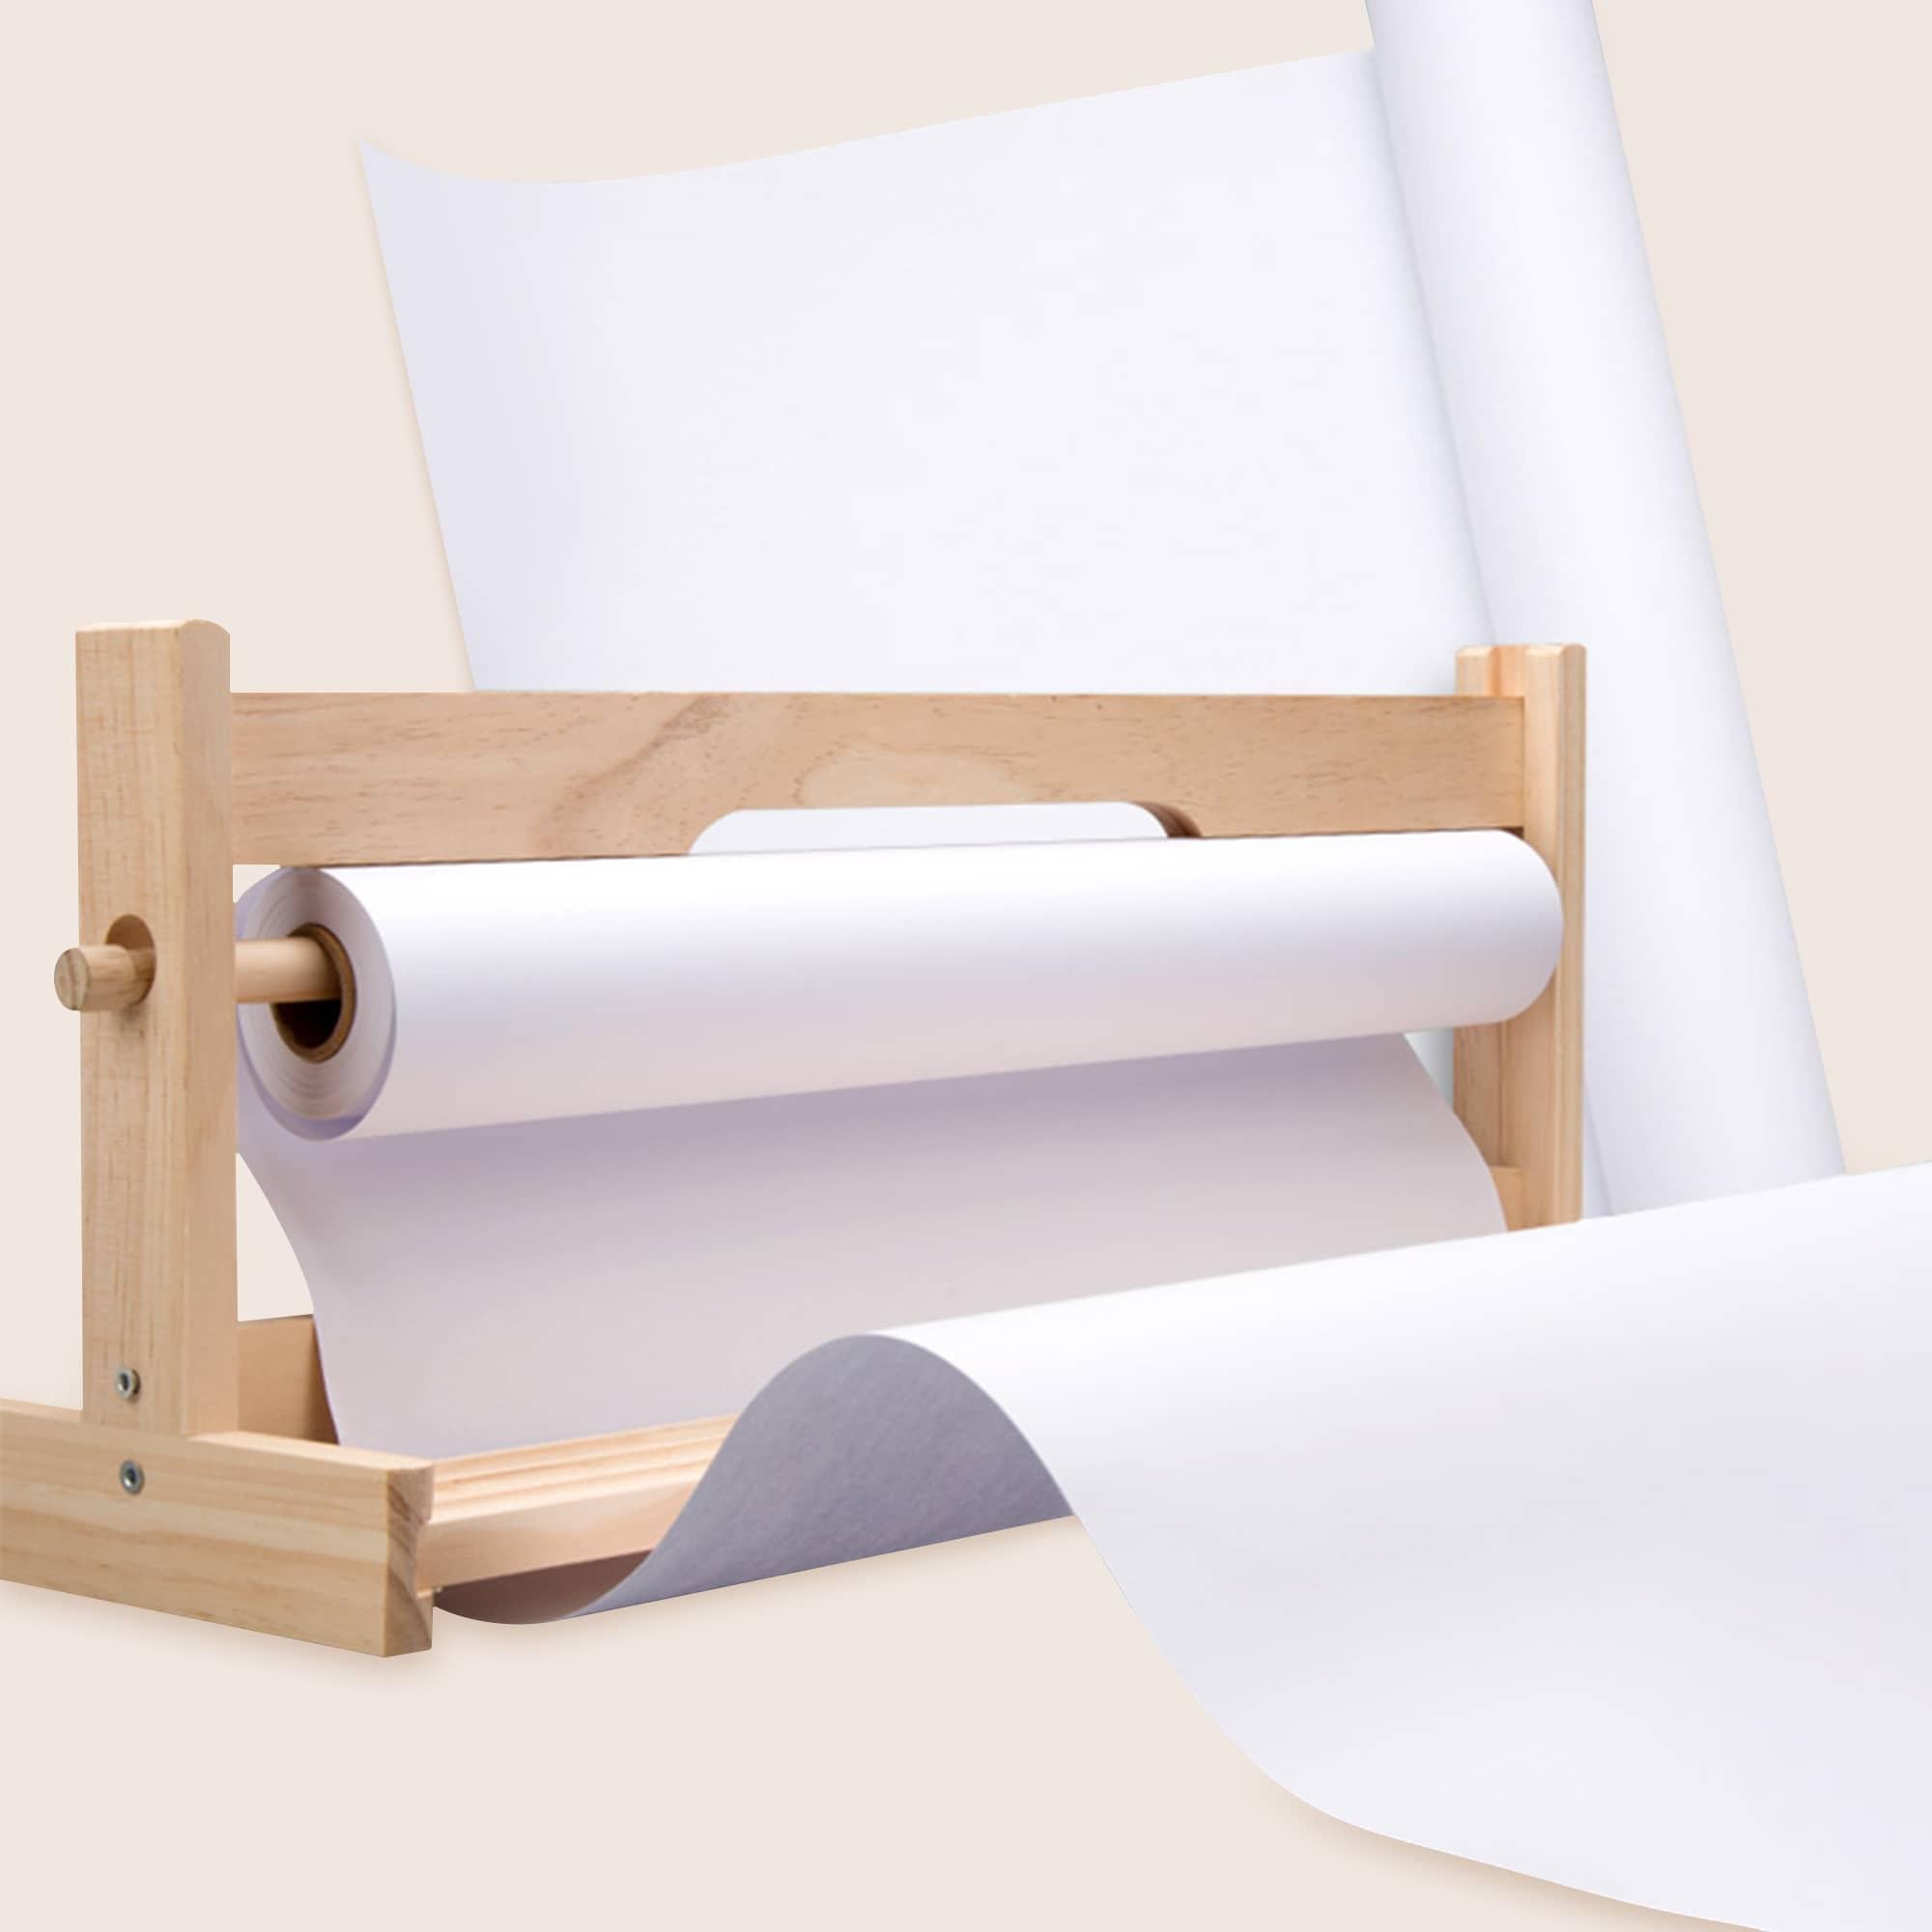 Tiny Land® Easel Paper Roll （3 rolls）, Tiny Land Offical Store®